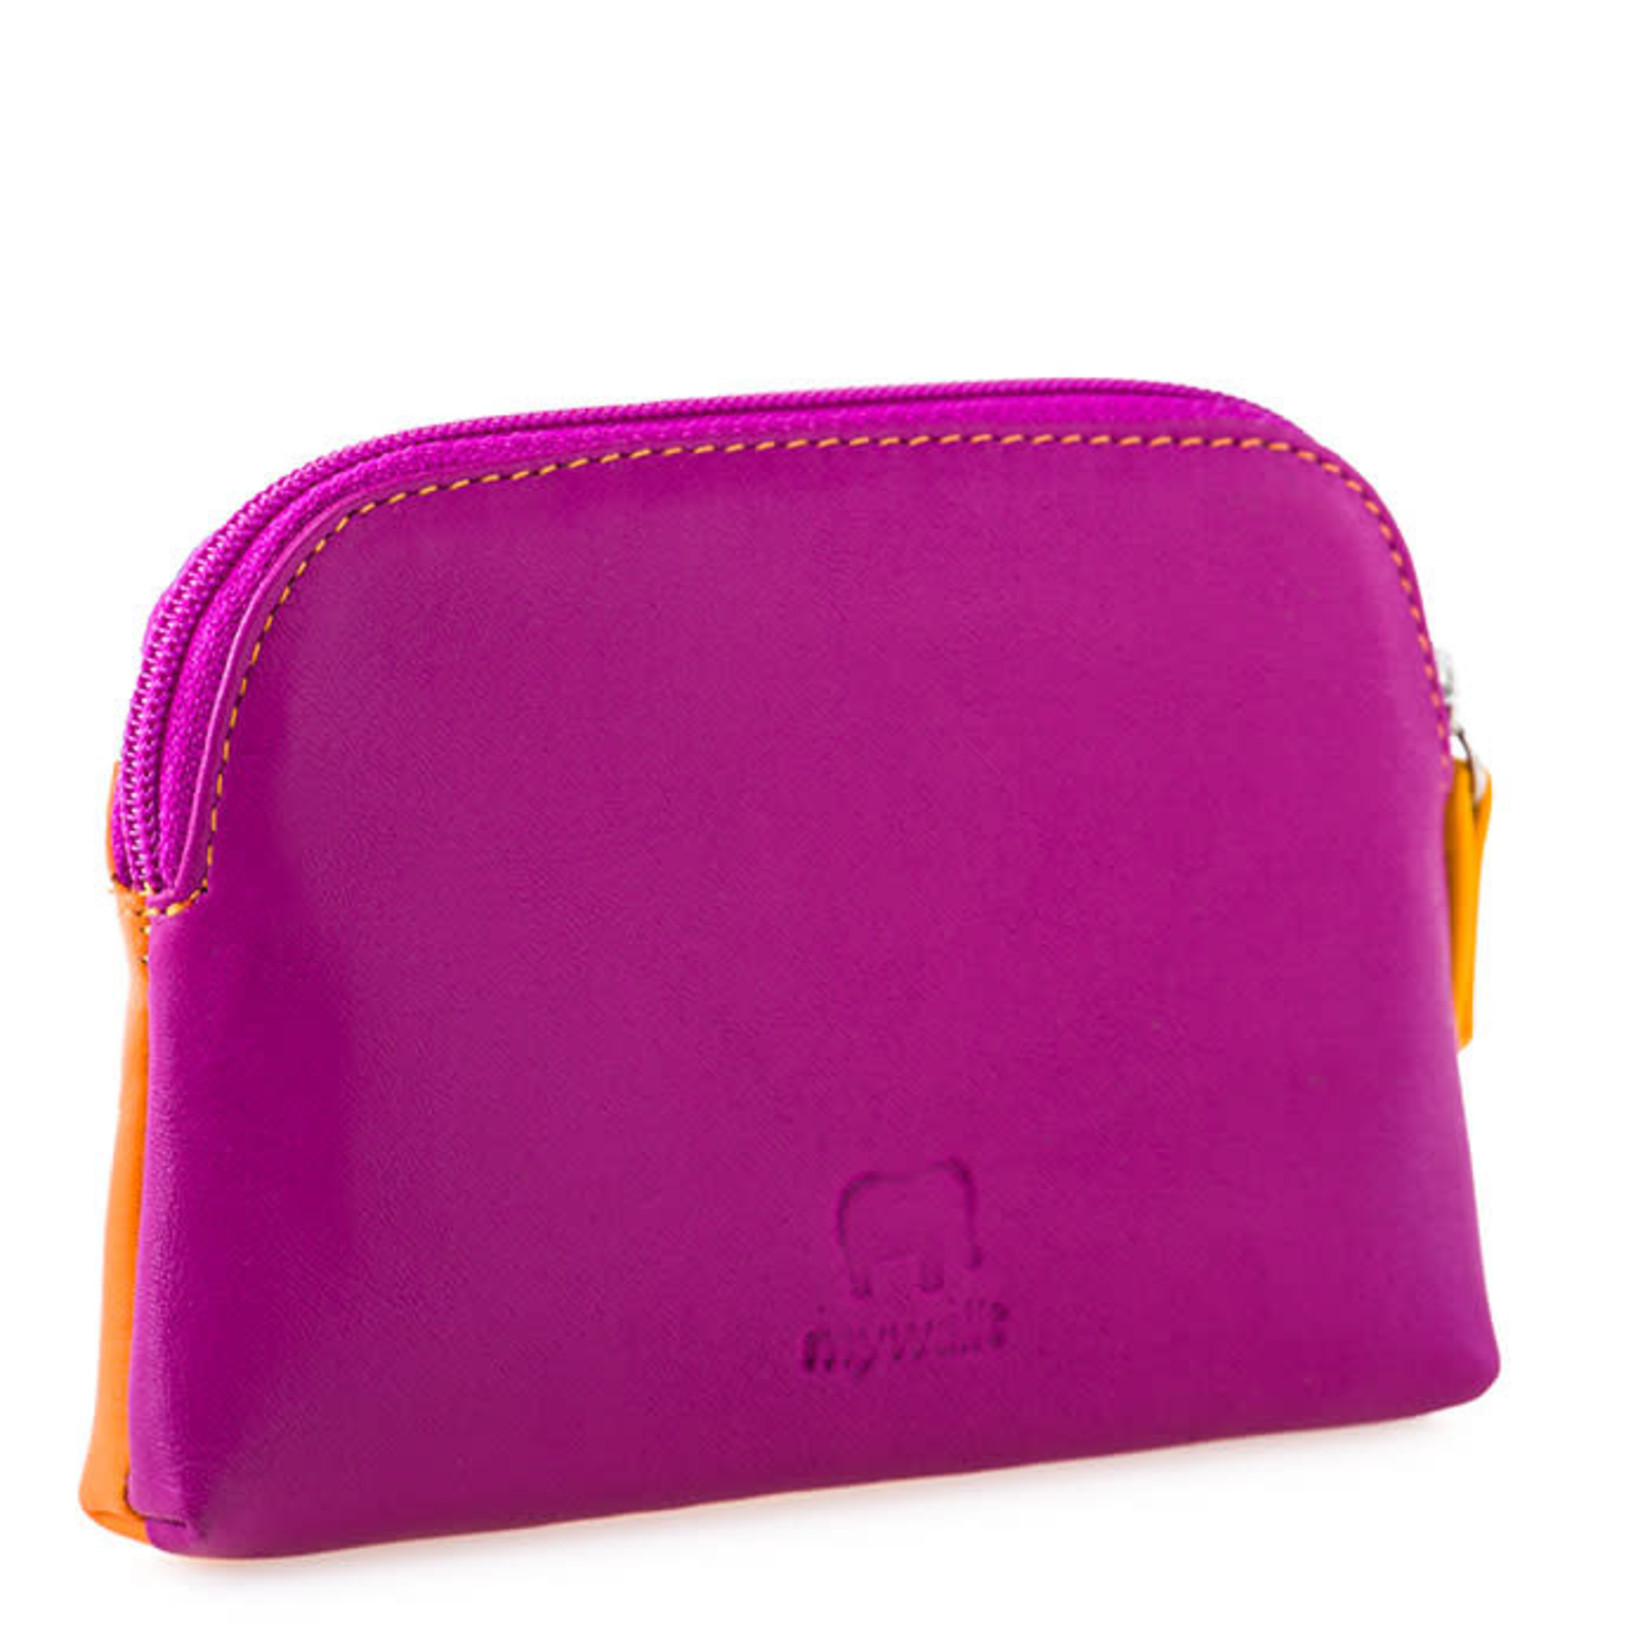 MYWALIT LARGE COIN PURSE